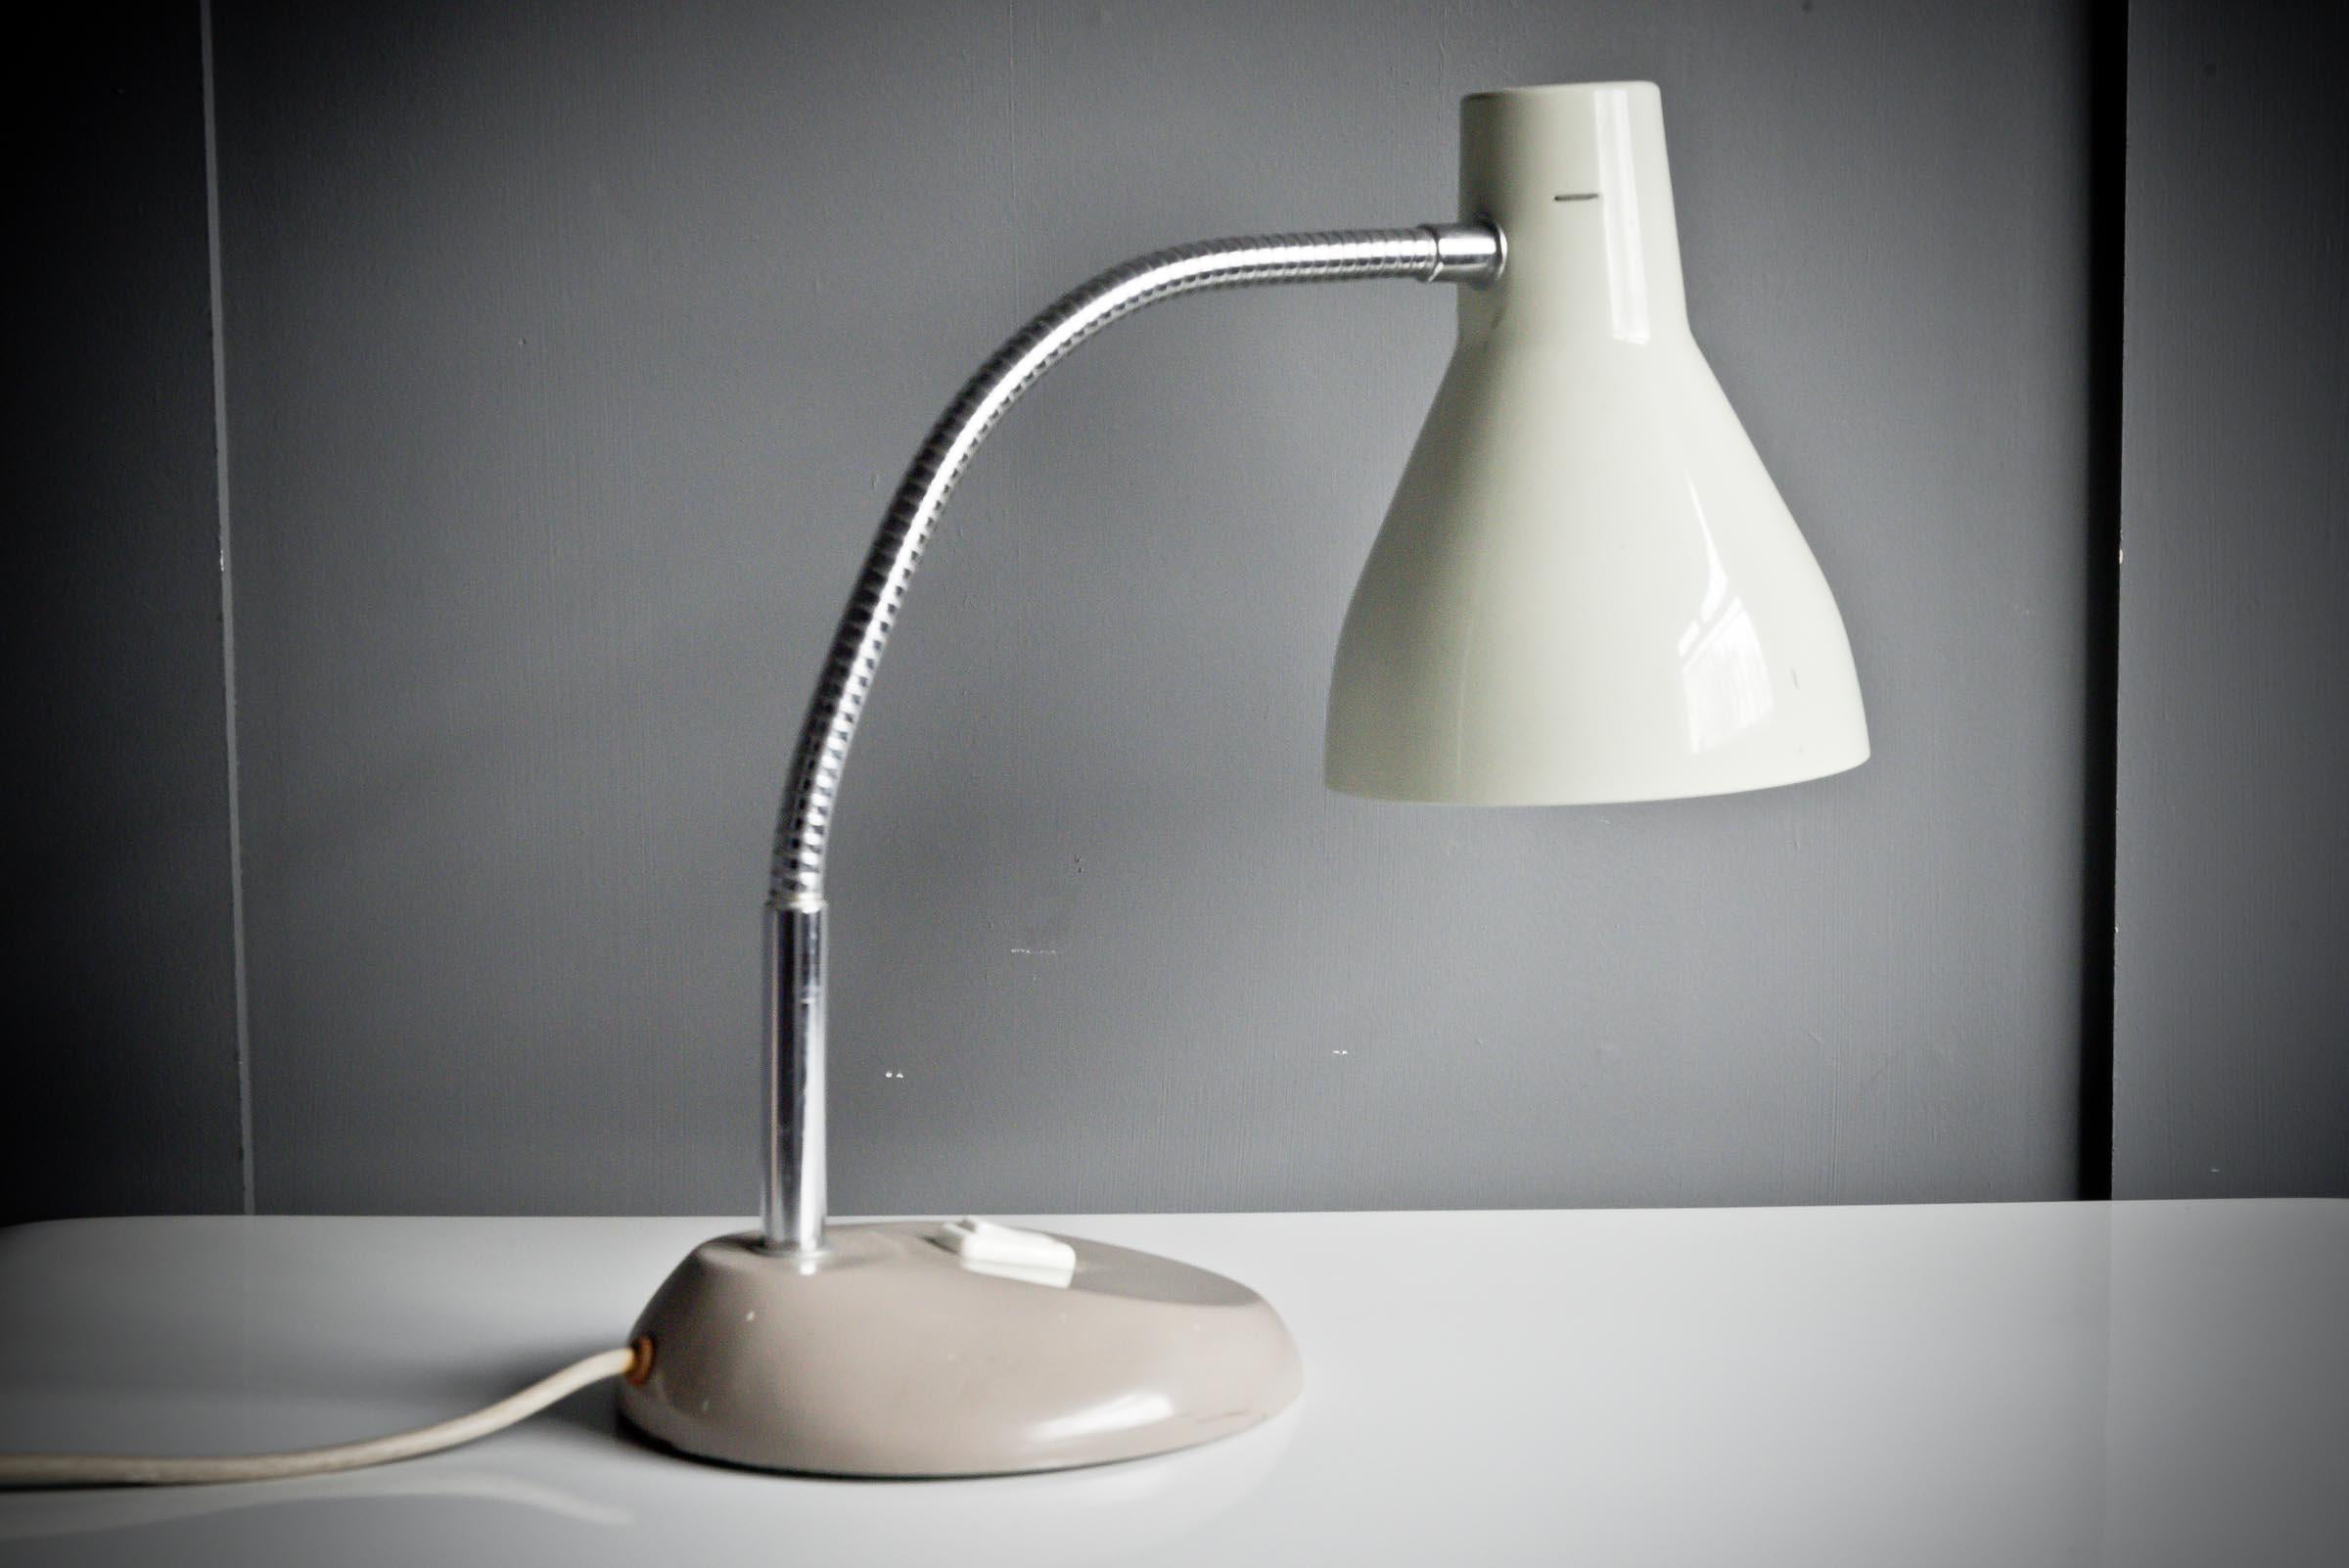 1970s desk lamp with articulated arm designed by Herbert Terry in an earthy tones of stone,grey and chrome.